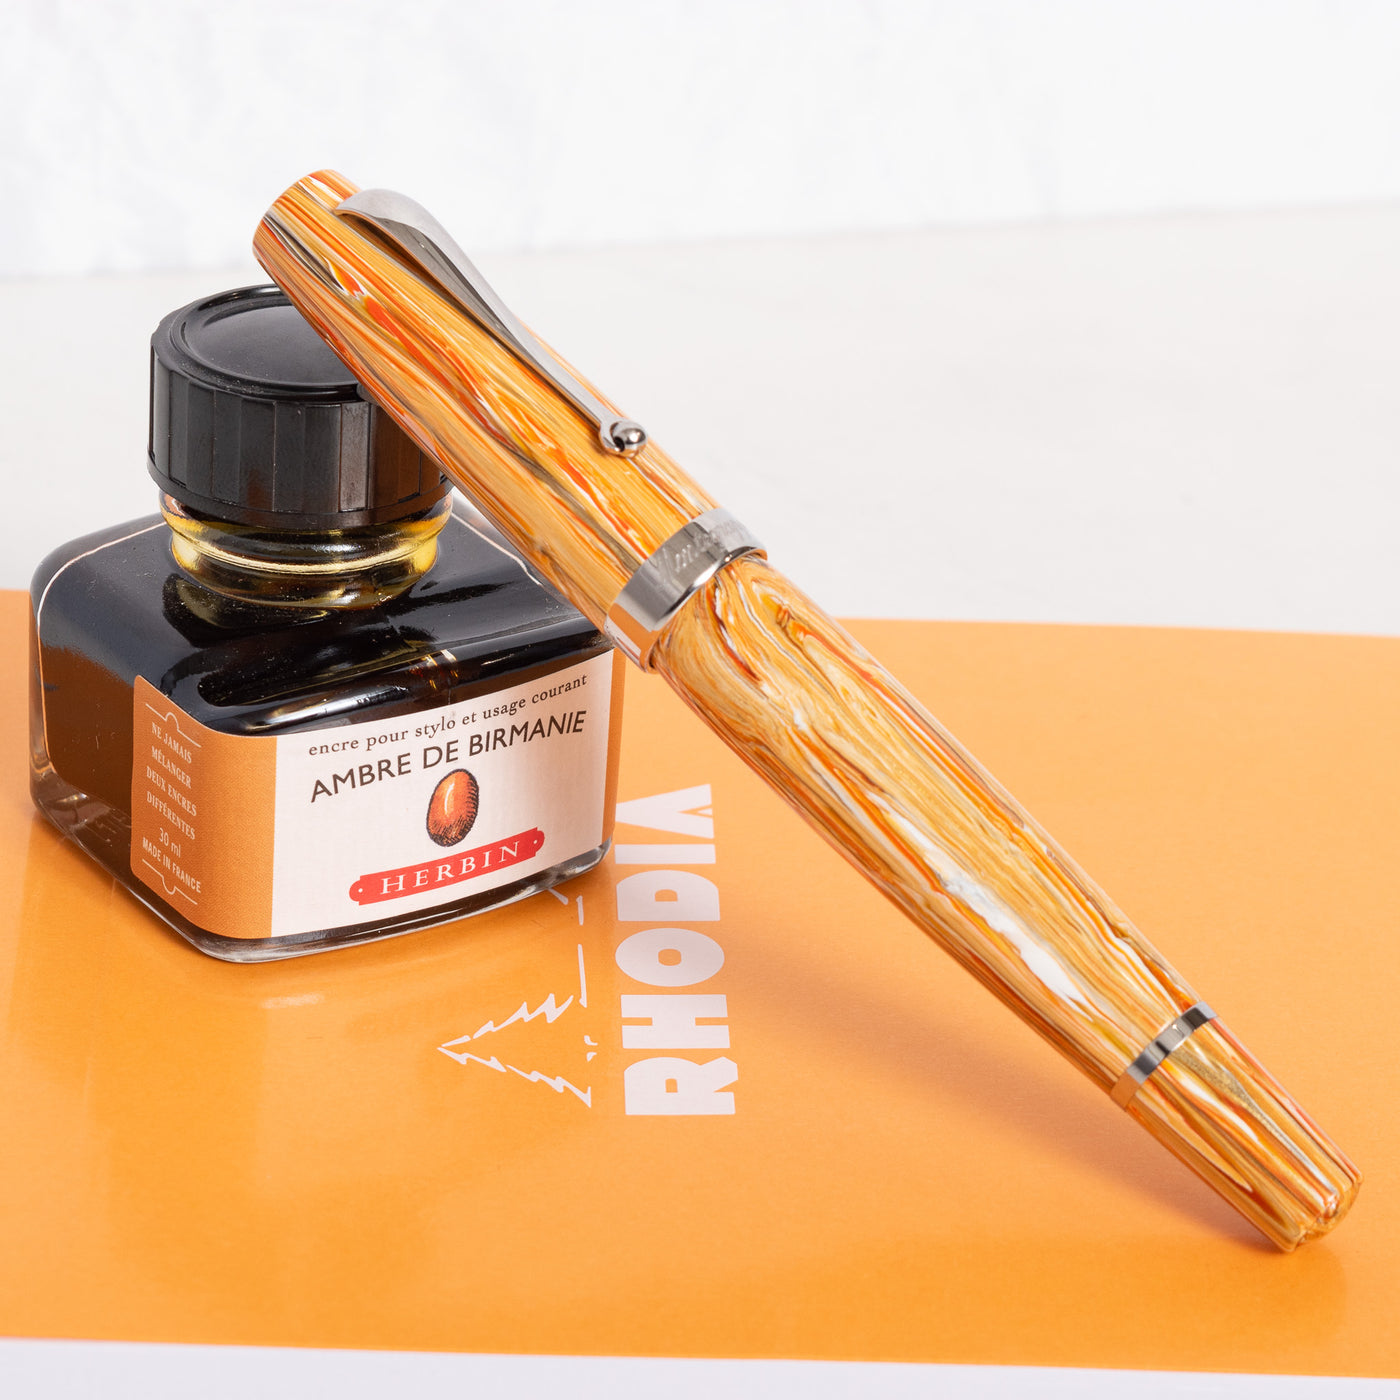 Montegrappa Miya Spice Explosion Fountain Pen capped